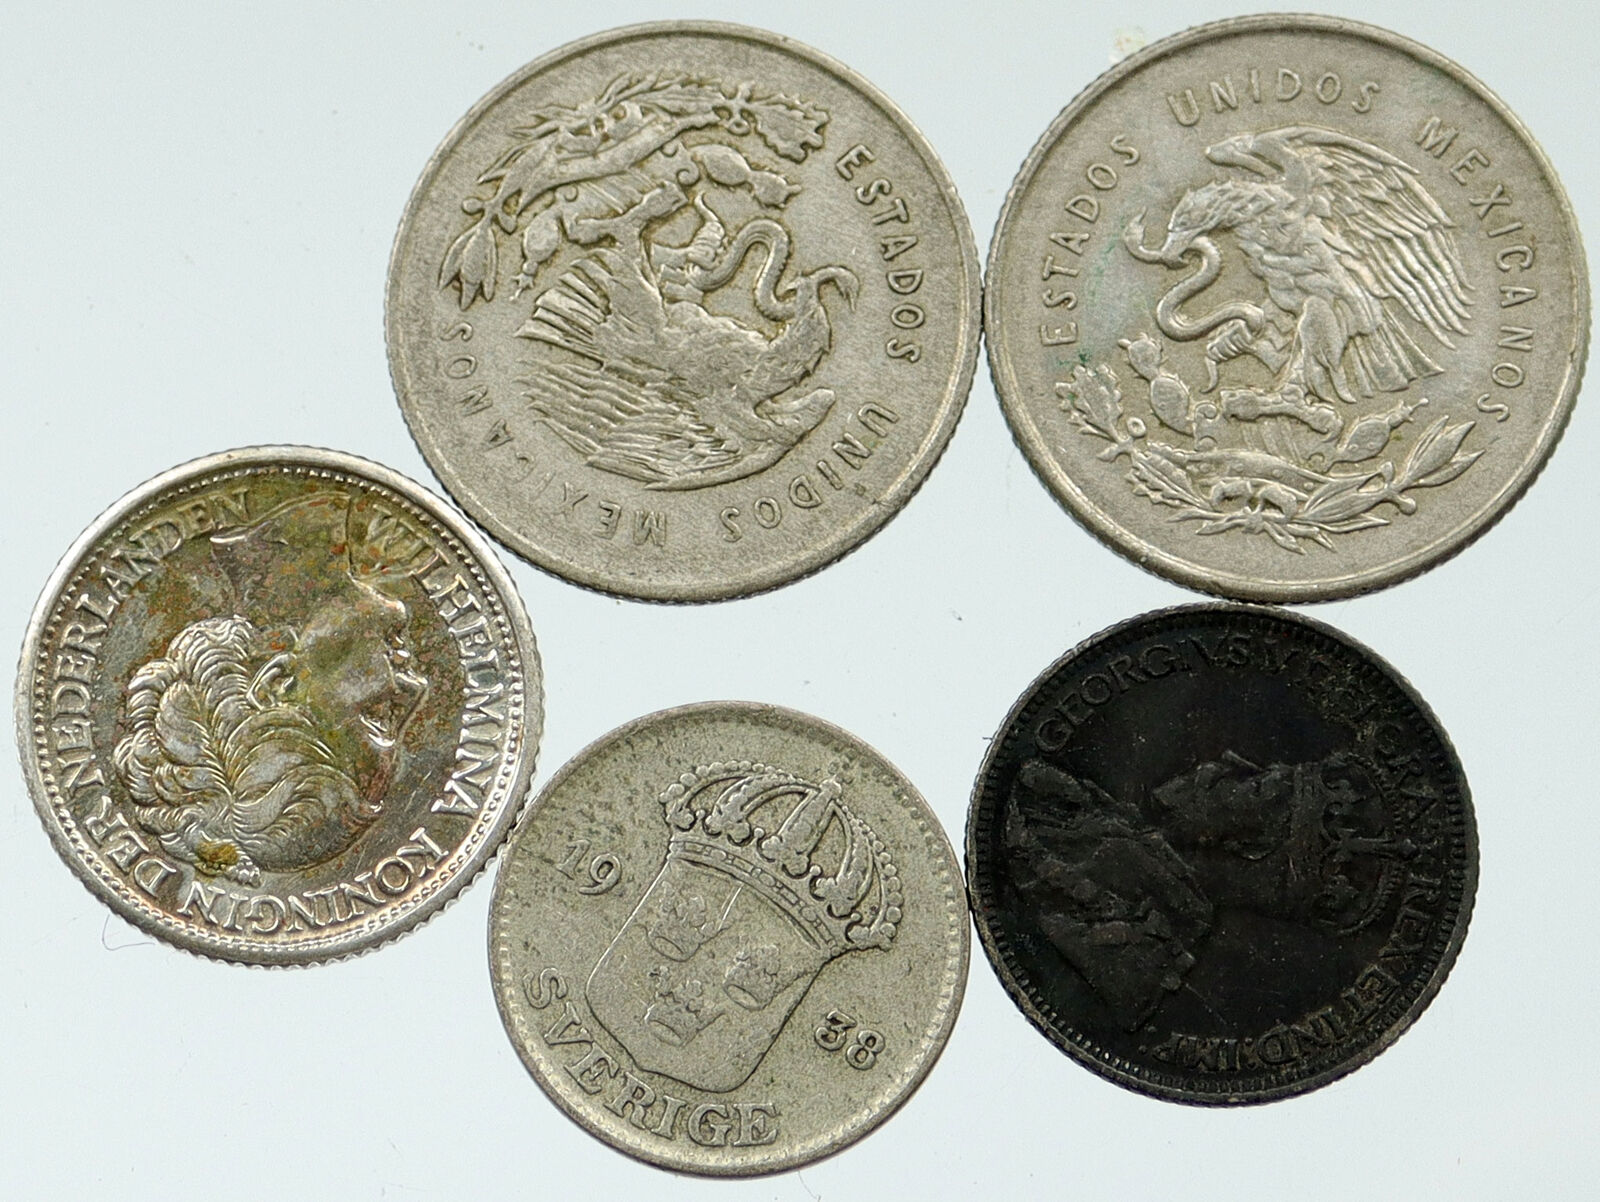 Lot of 5 Silver WORLD COINS Authentic Collection Vintage Group DEAL GIFT i115759